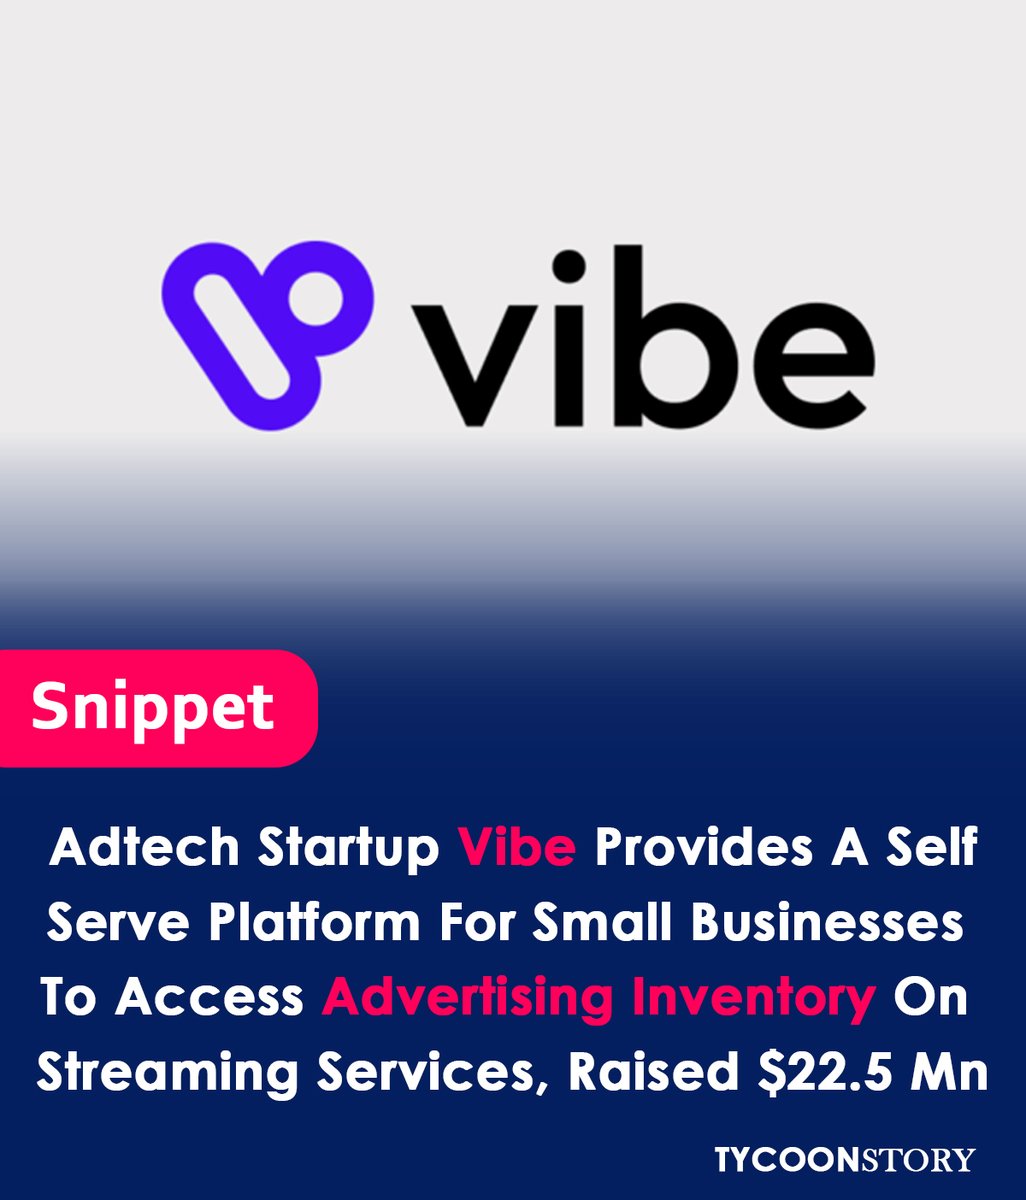 Adtech startup Vibe empowers small businesses with self-serve streaming TV ads.
#adtech #streamingtv #OTT #CTV #smallbusiness #advertising #selfserveads #SME #VC #adtechstartup #adserver #marketplace #adinventory #targetedadvertising #performancemarketing @vibedotco